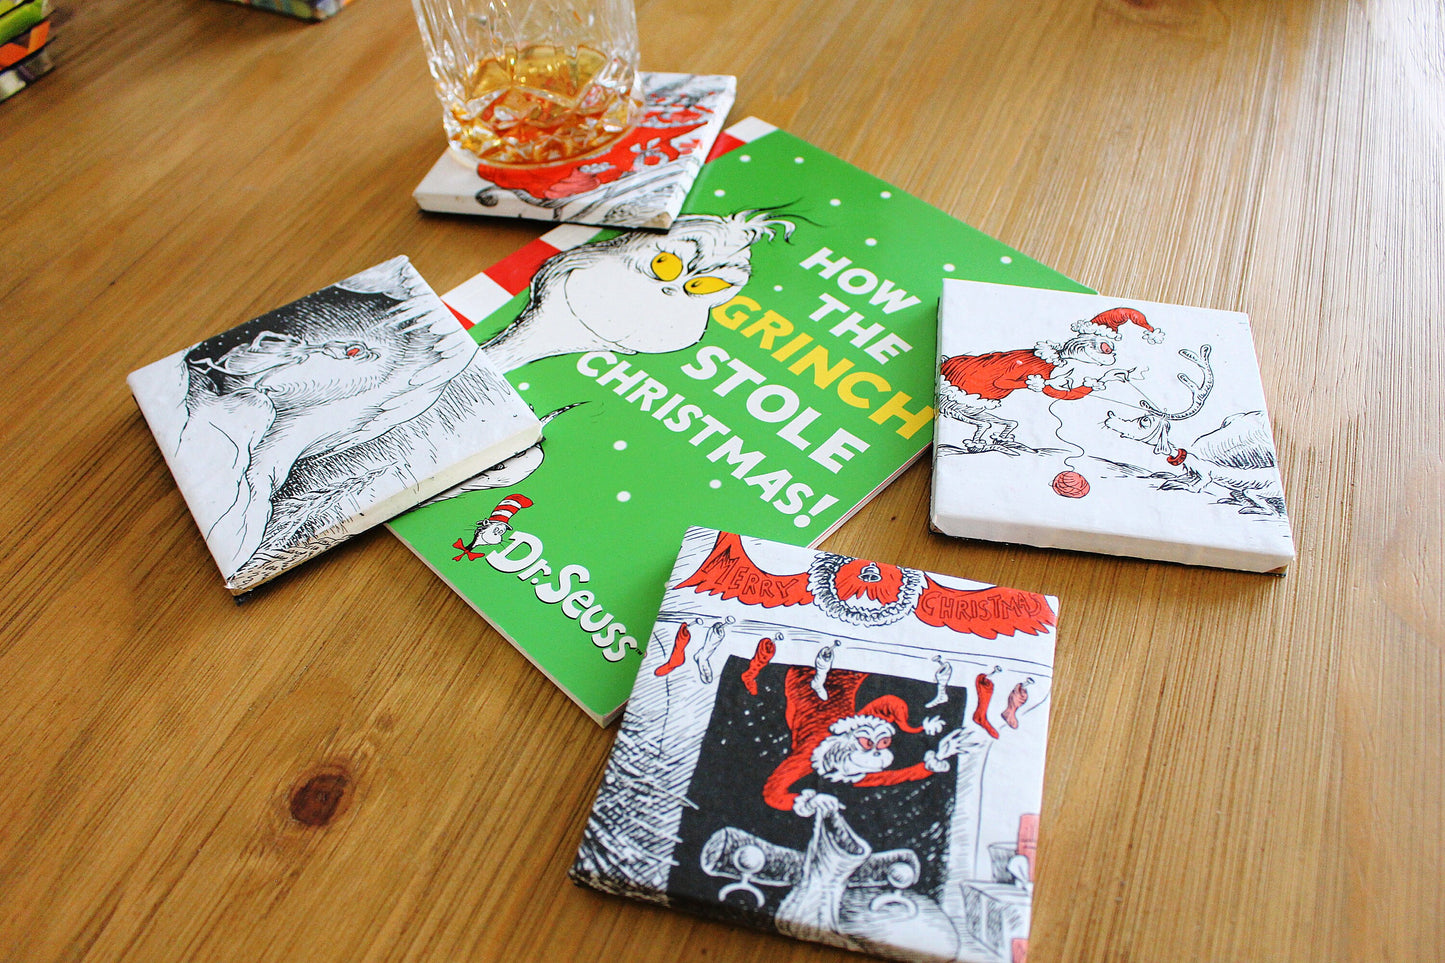 Recycled The Grinch Book Page Coasters Christmas table decor Humbug! Upcycled Festive placemat Stocking filler gift  Book Illustration